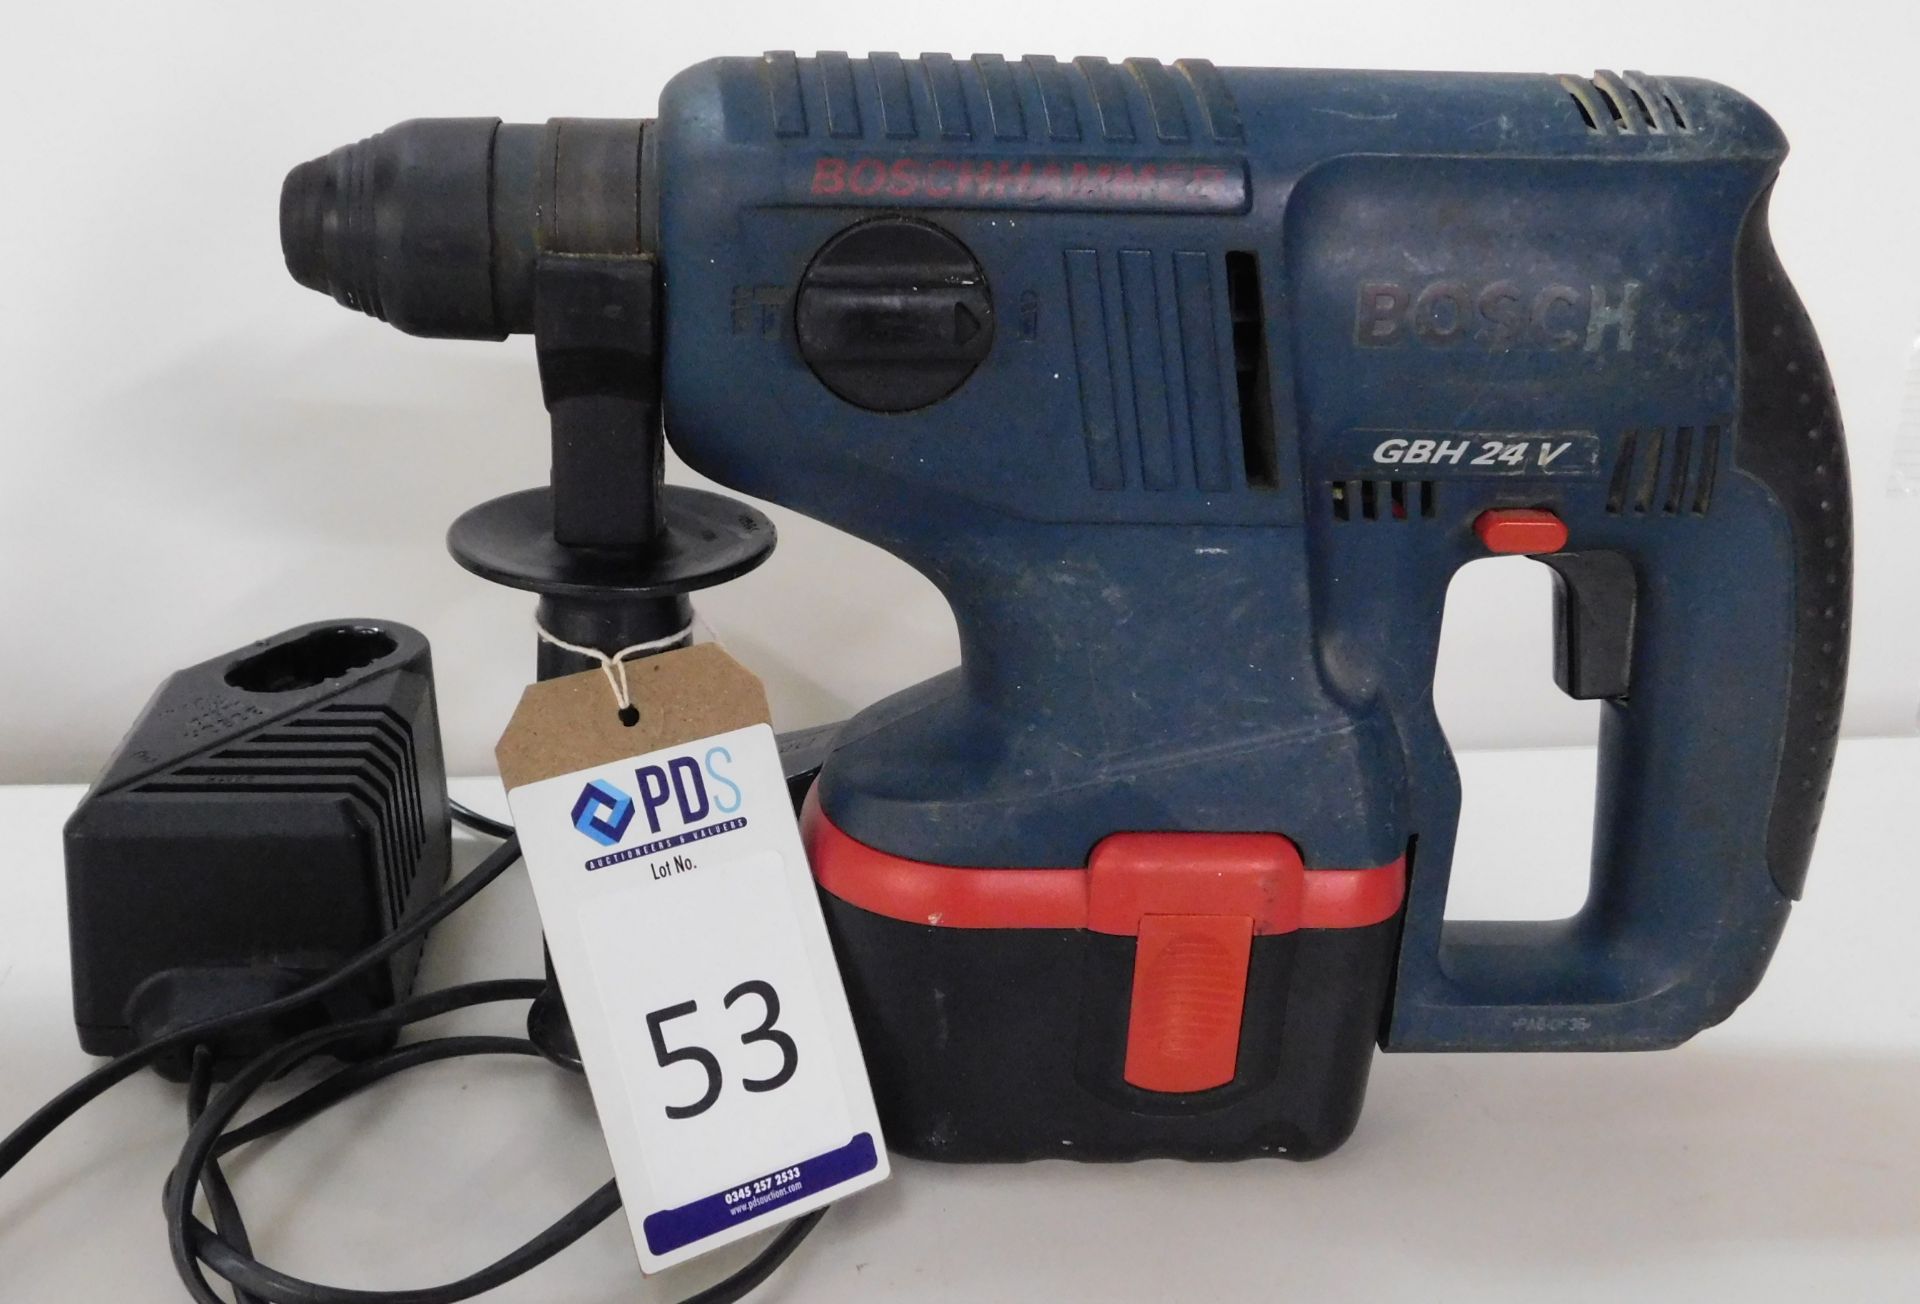 Bosch GBH 2 Cordless Hammer Drill, Serial Number 38302118 with Battery & Charger (Location: